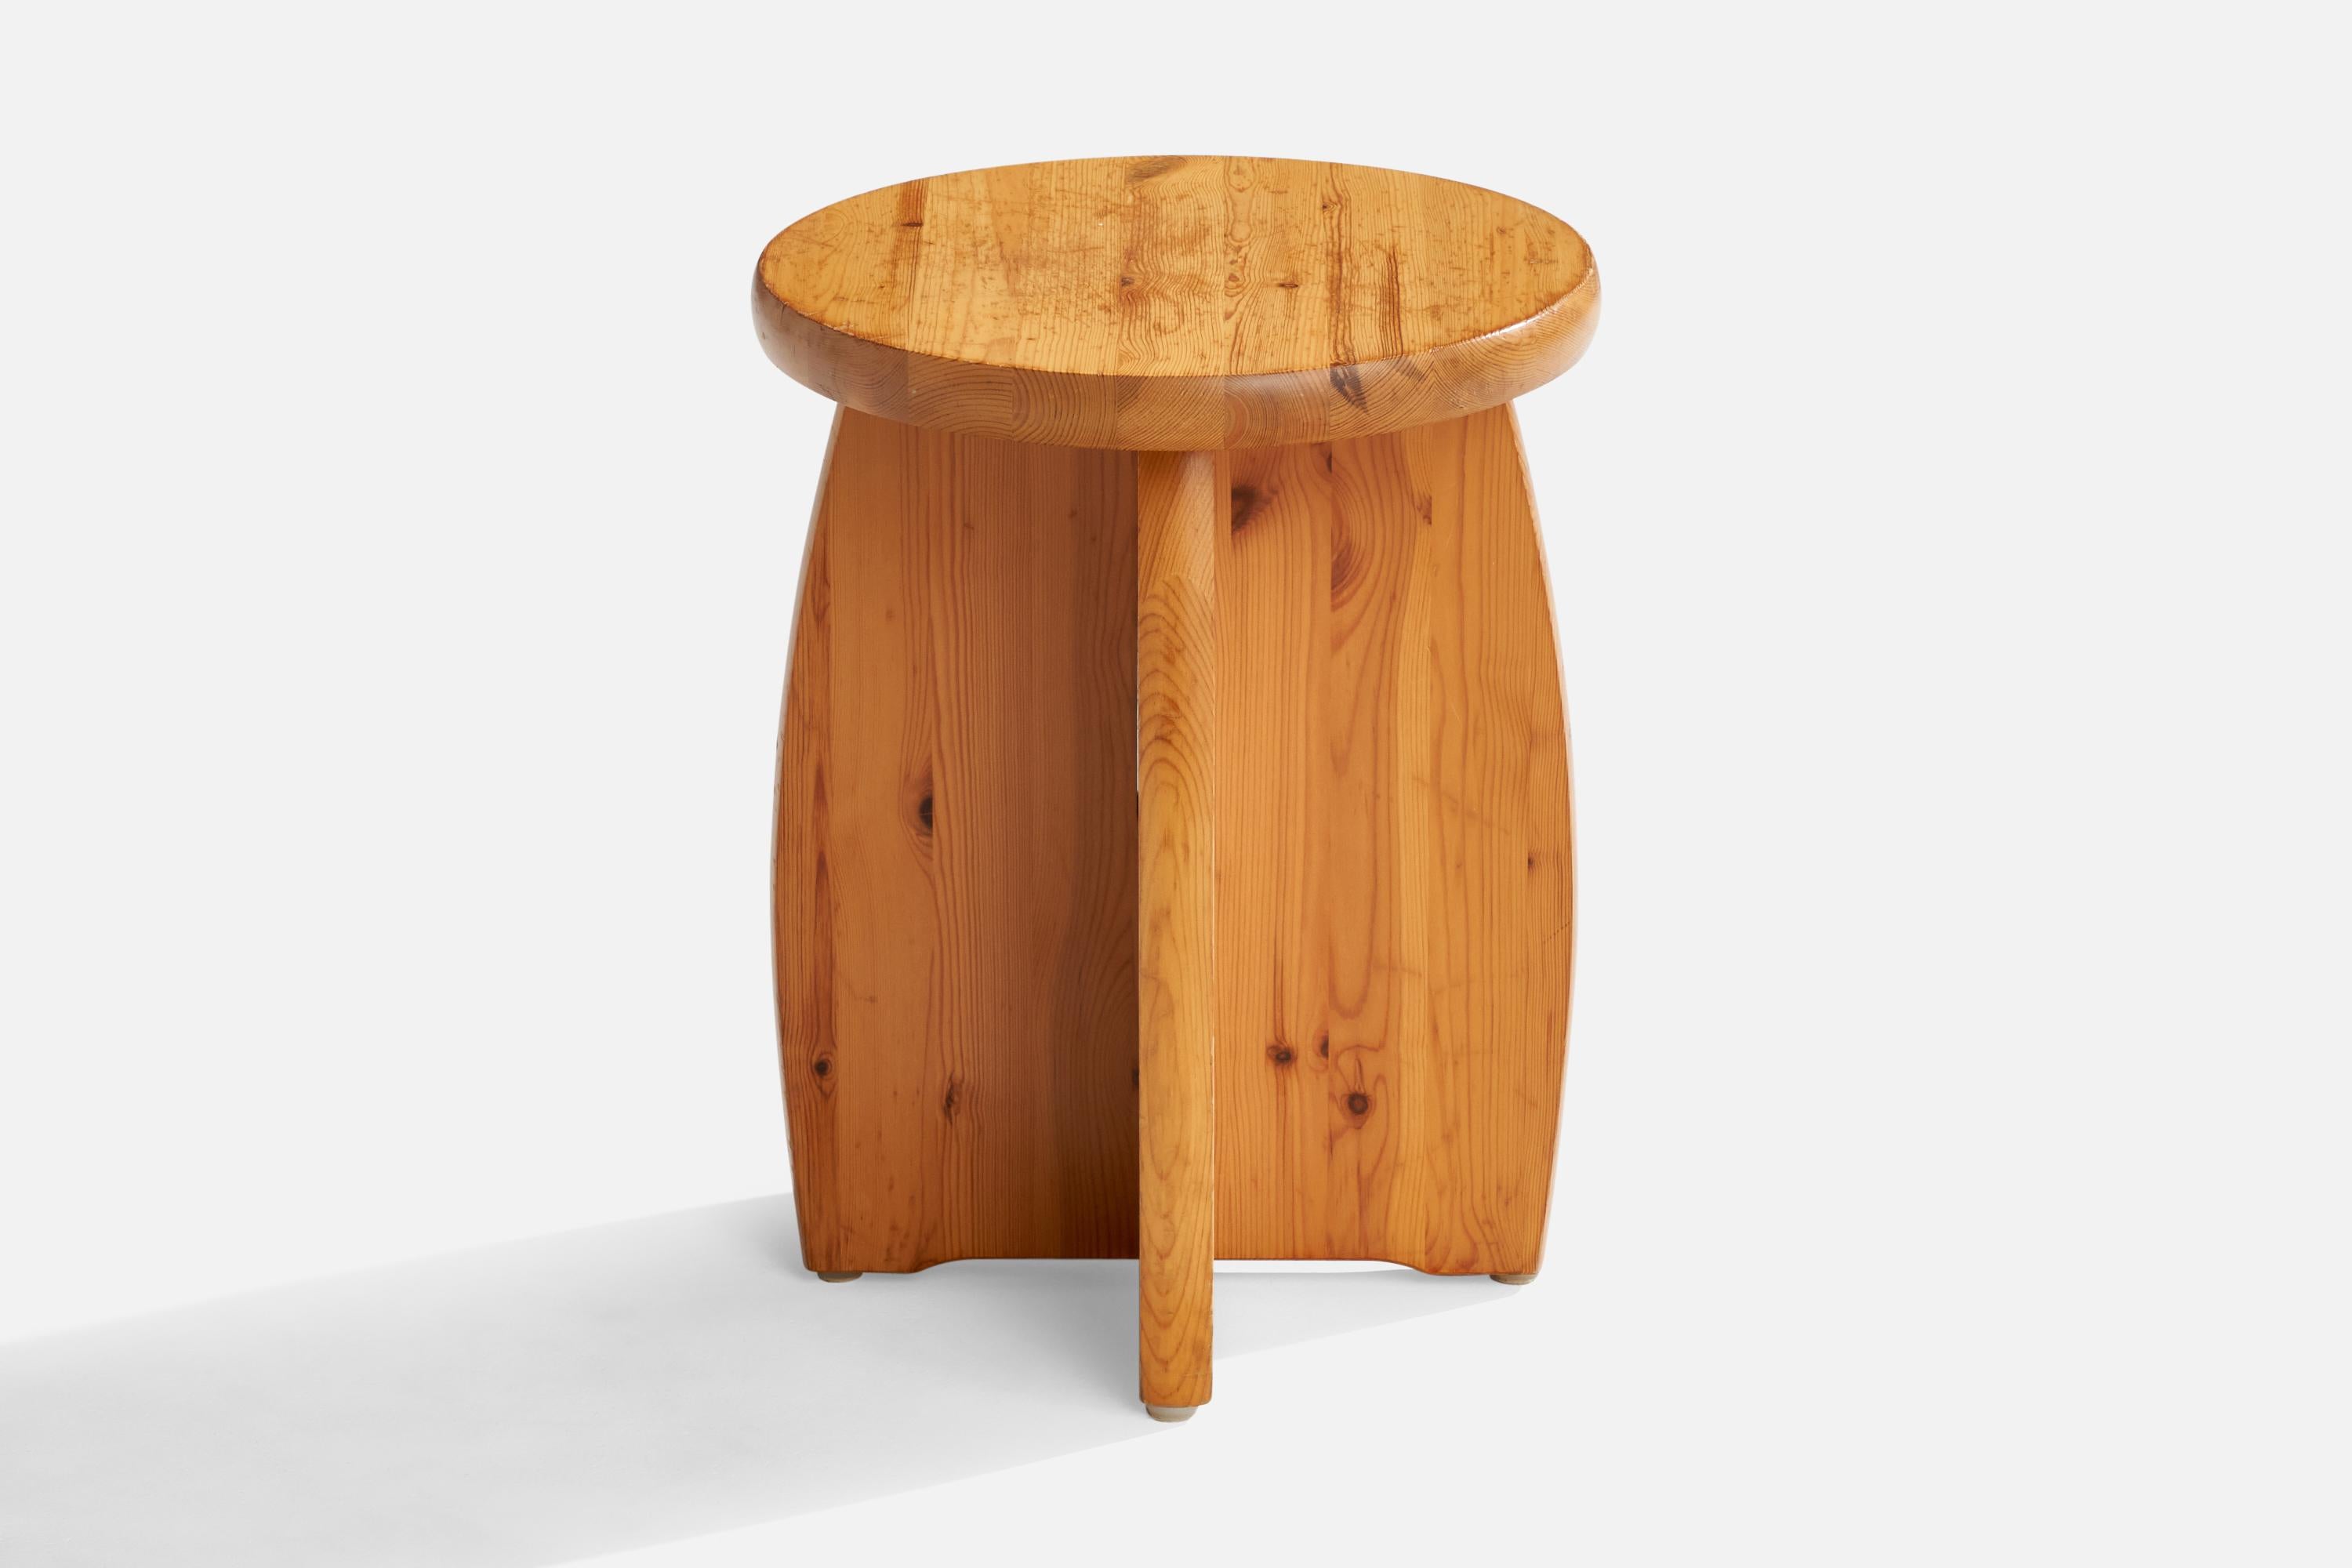 A pine stool designed and produced in Sweden c. 1970s.

Seat height 17.25”